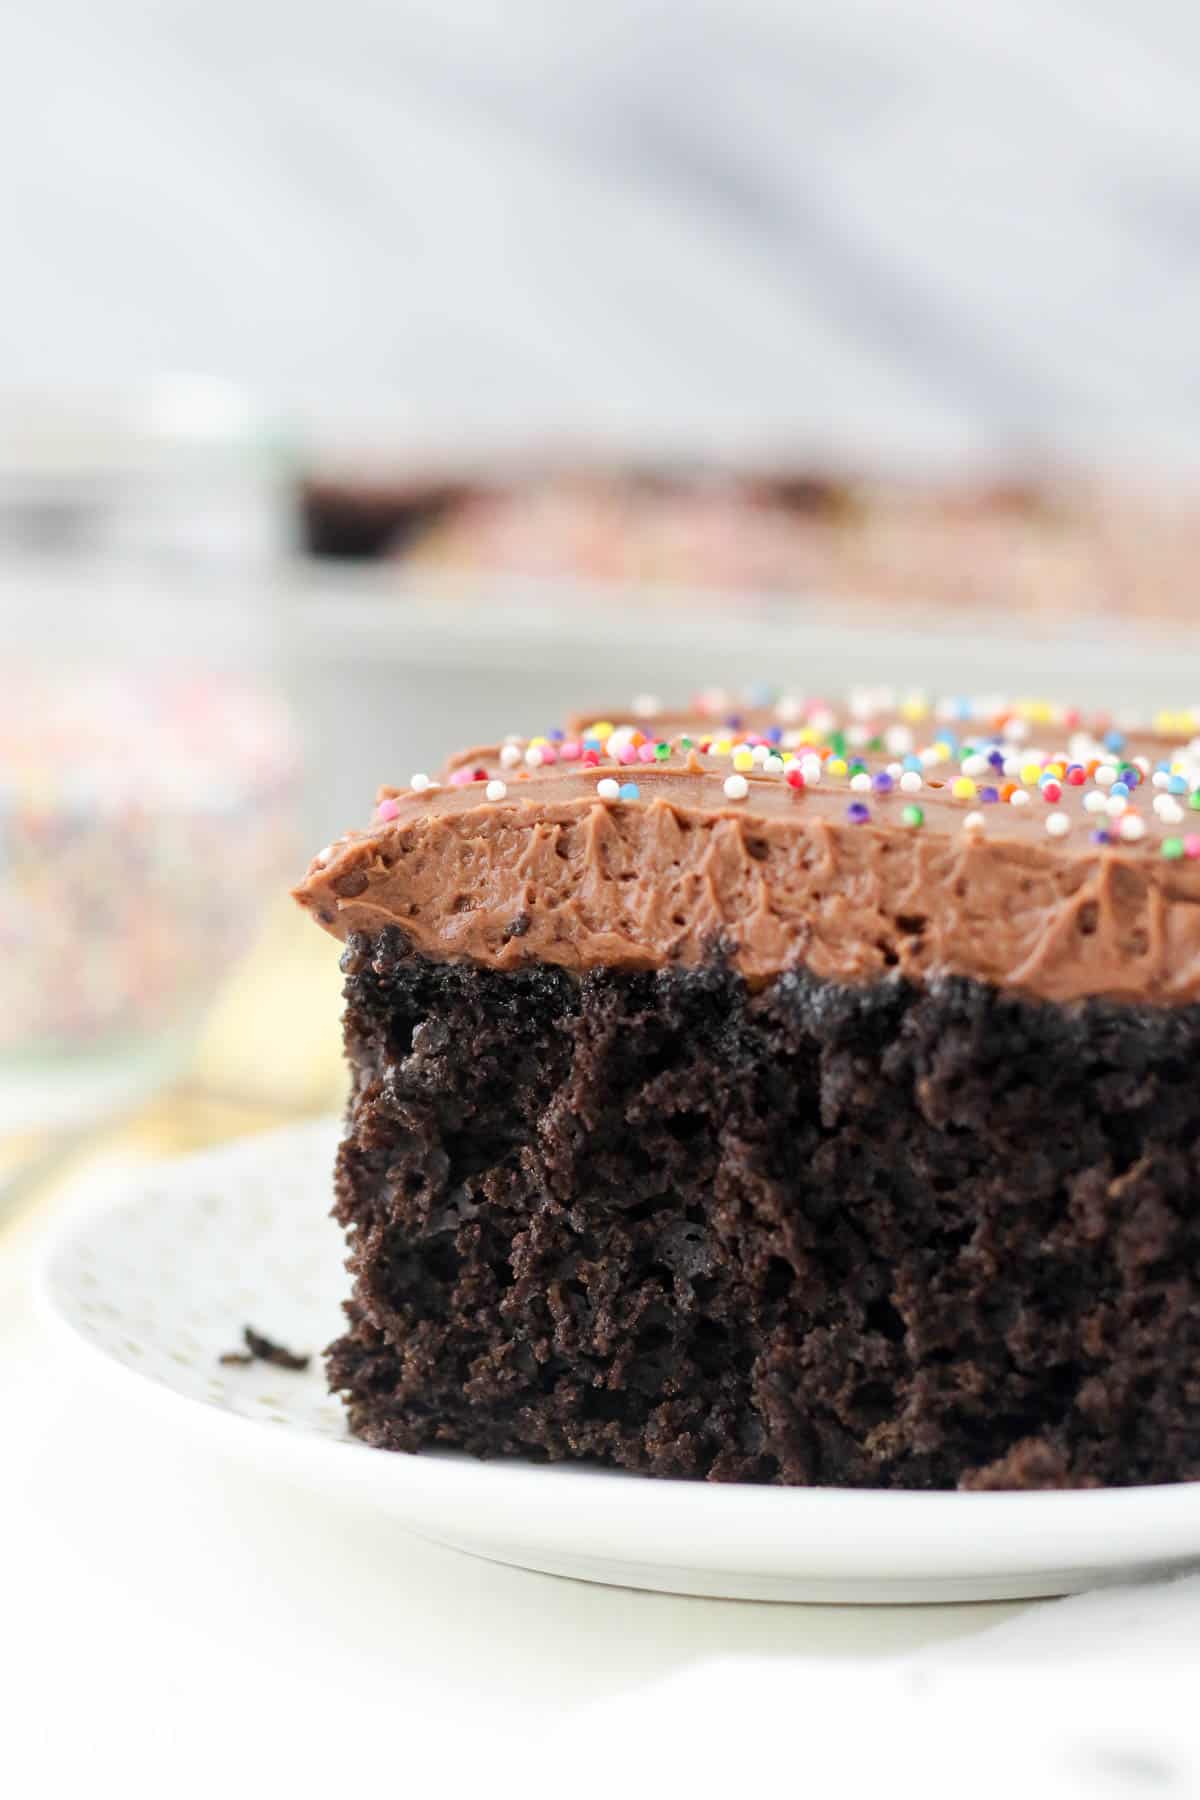 A slice of frosted chocolate cake topped with rainbow sprinkles on a white plate.